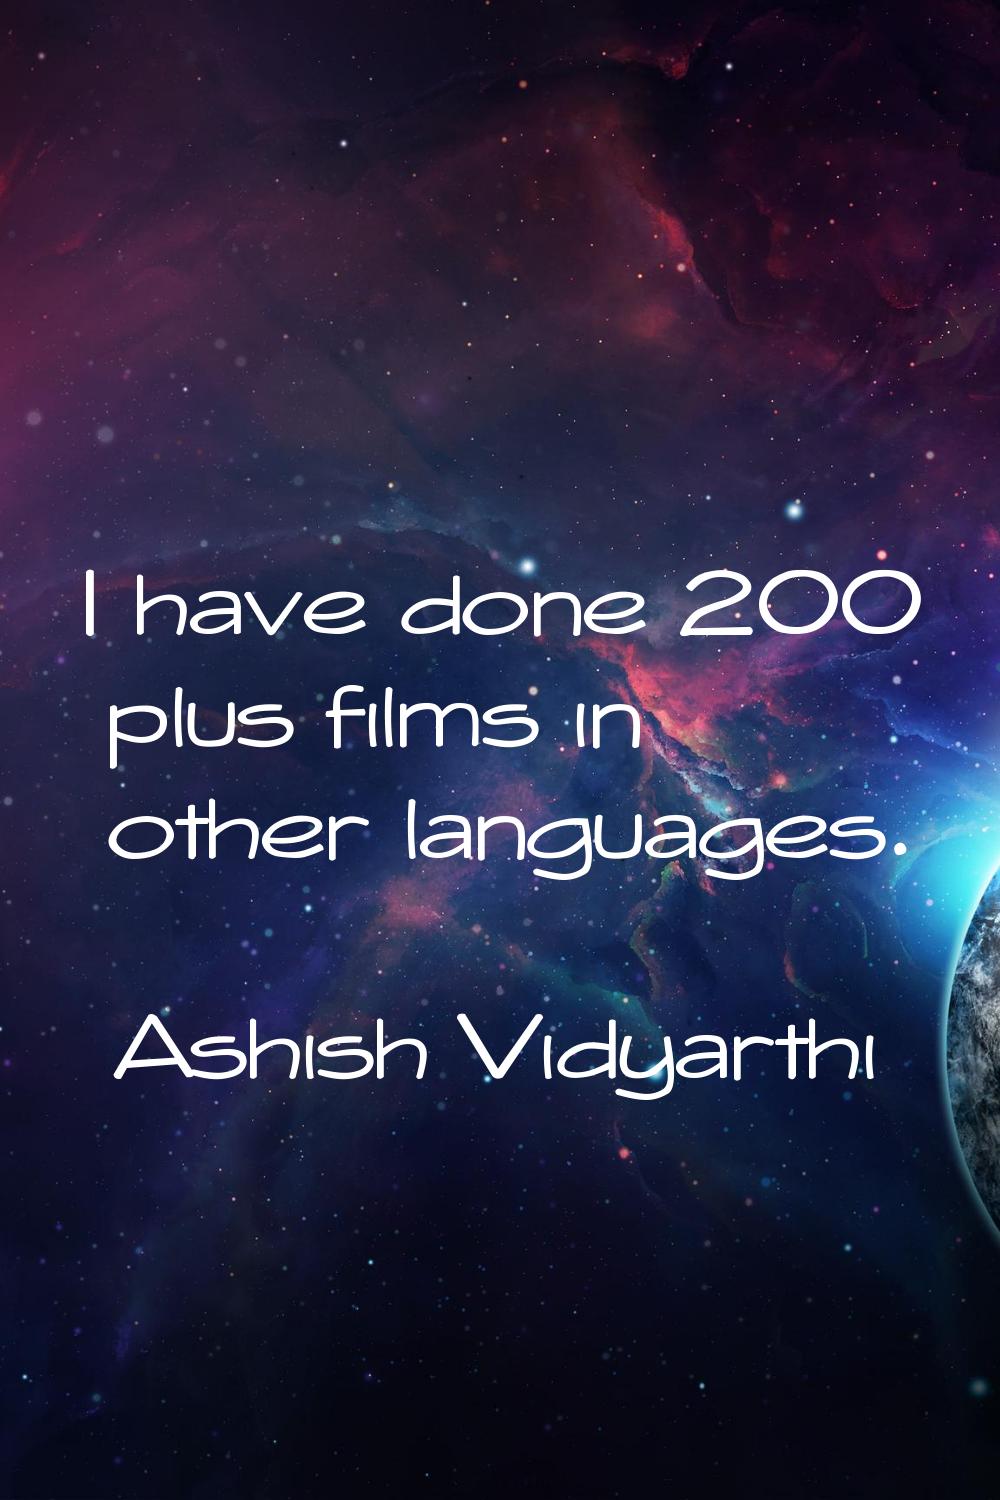 I have done 200 plus films in other languages.